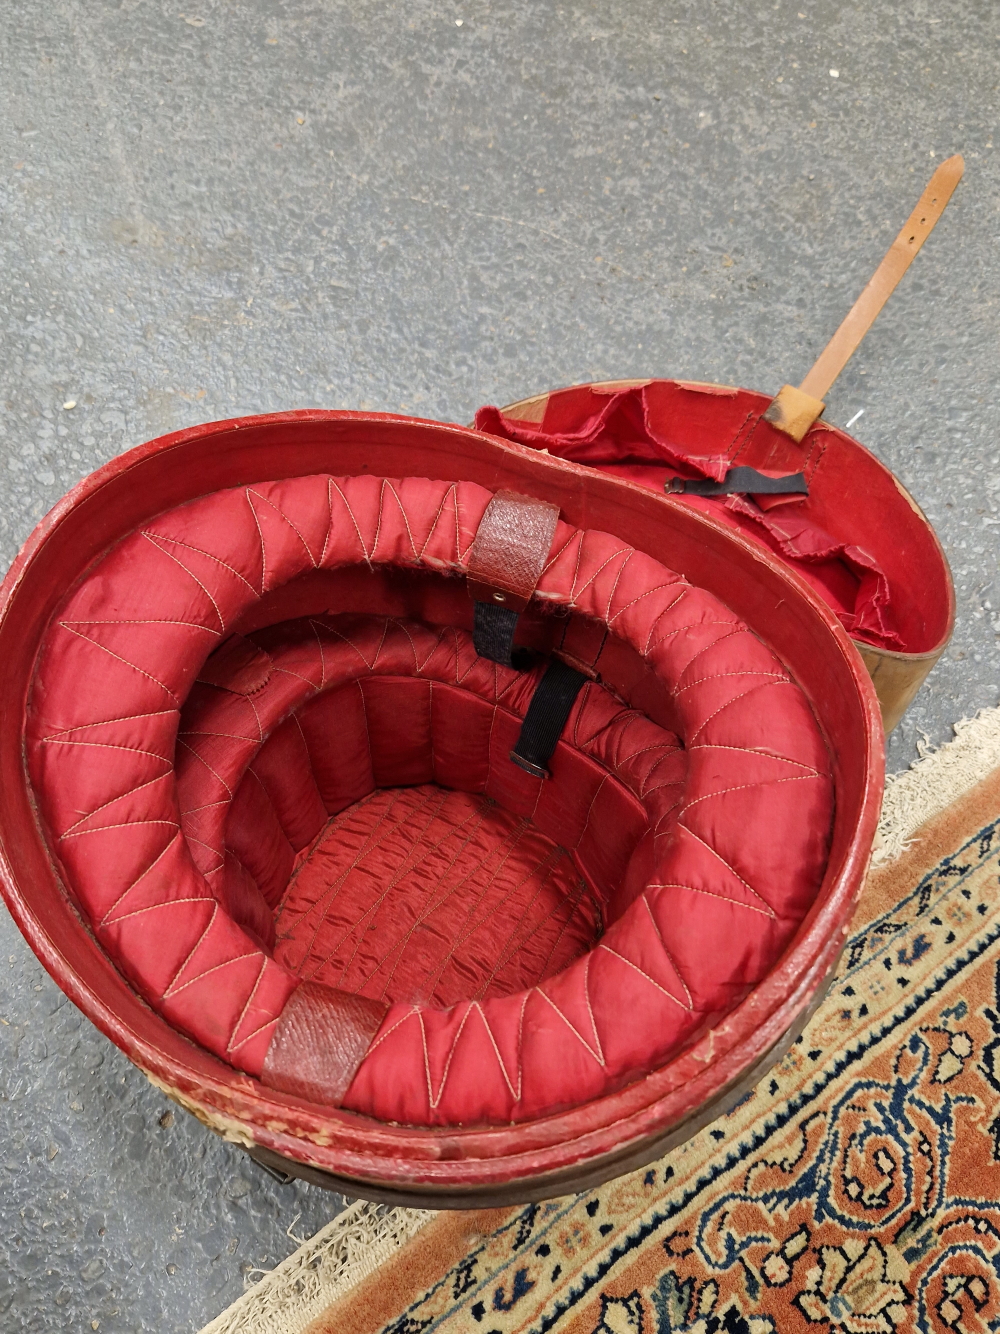 A LEATHER DOUBLE TOP HAT CASE LINED IN RED, TOGETHER WITH A COPPER CIRCULAR PAN WITH RING HANDLES. - Image 6 of 10